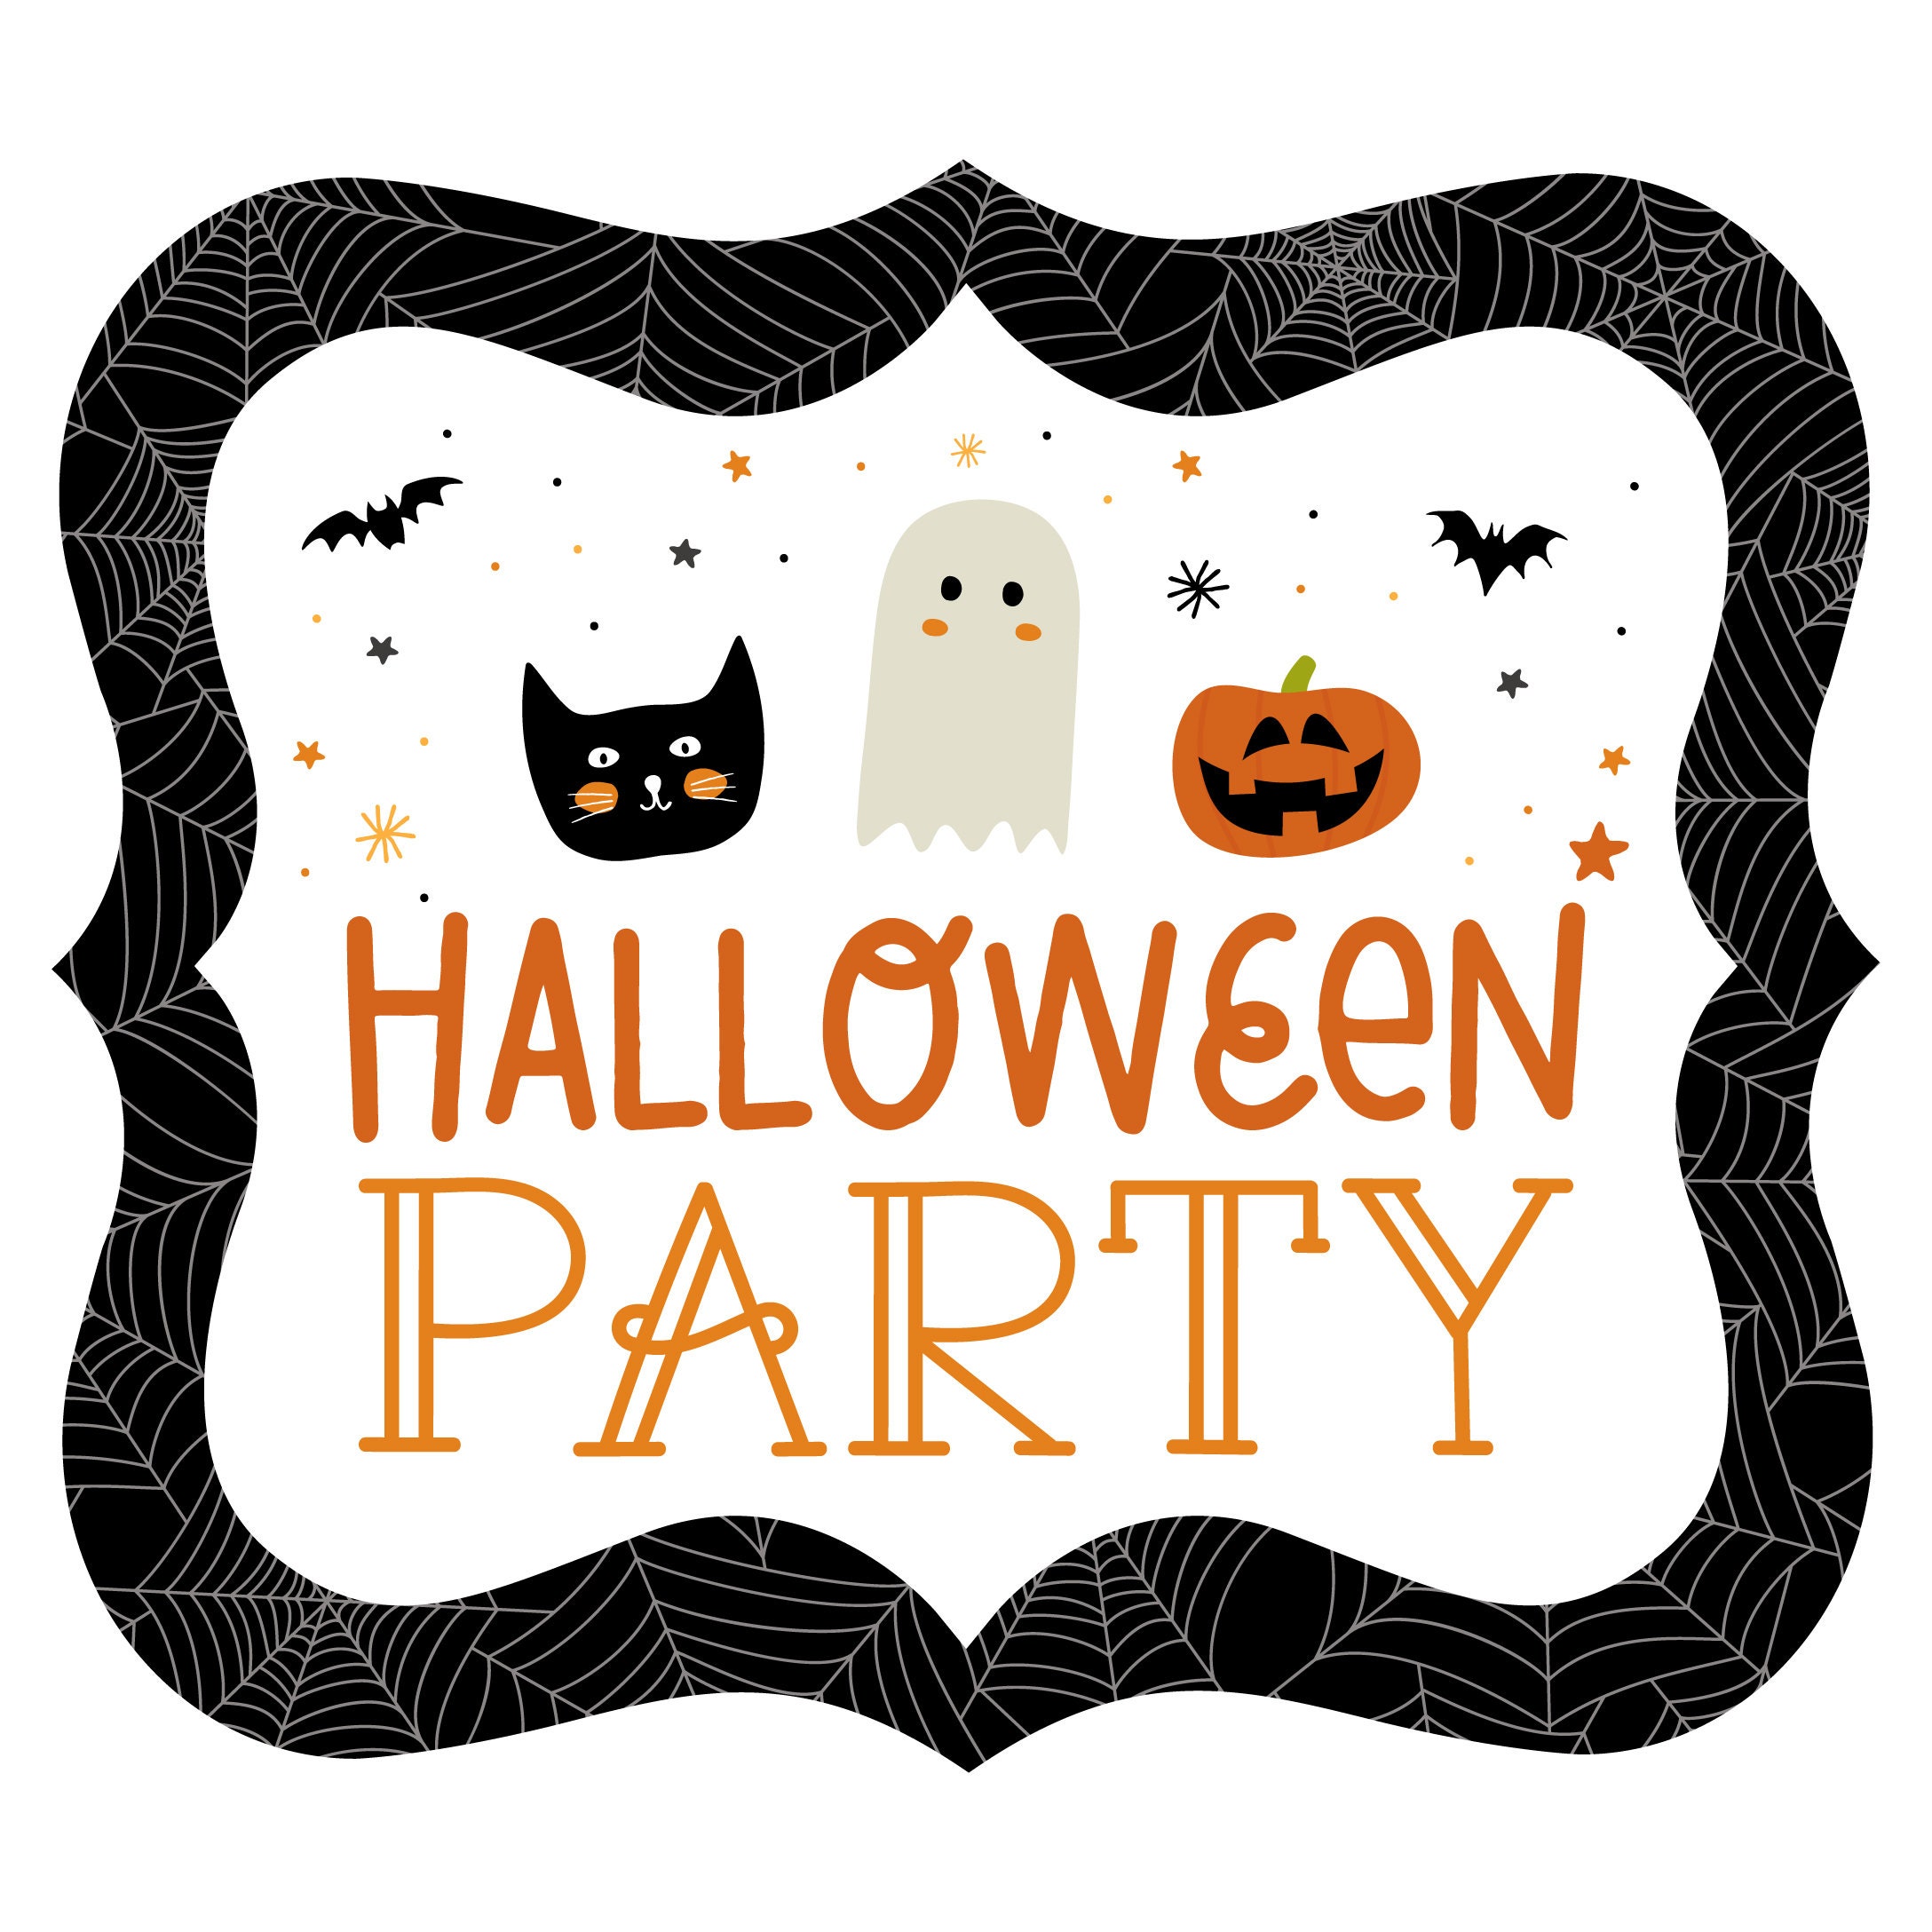 Echo Park HALLOWEEN PARTY Collection Frames & Tags 33 Pieces -  Portugal